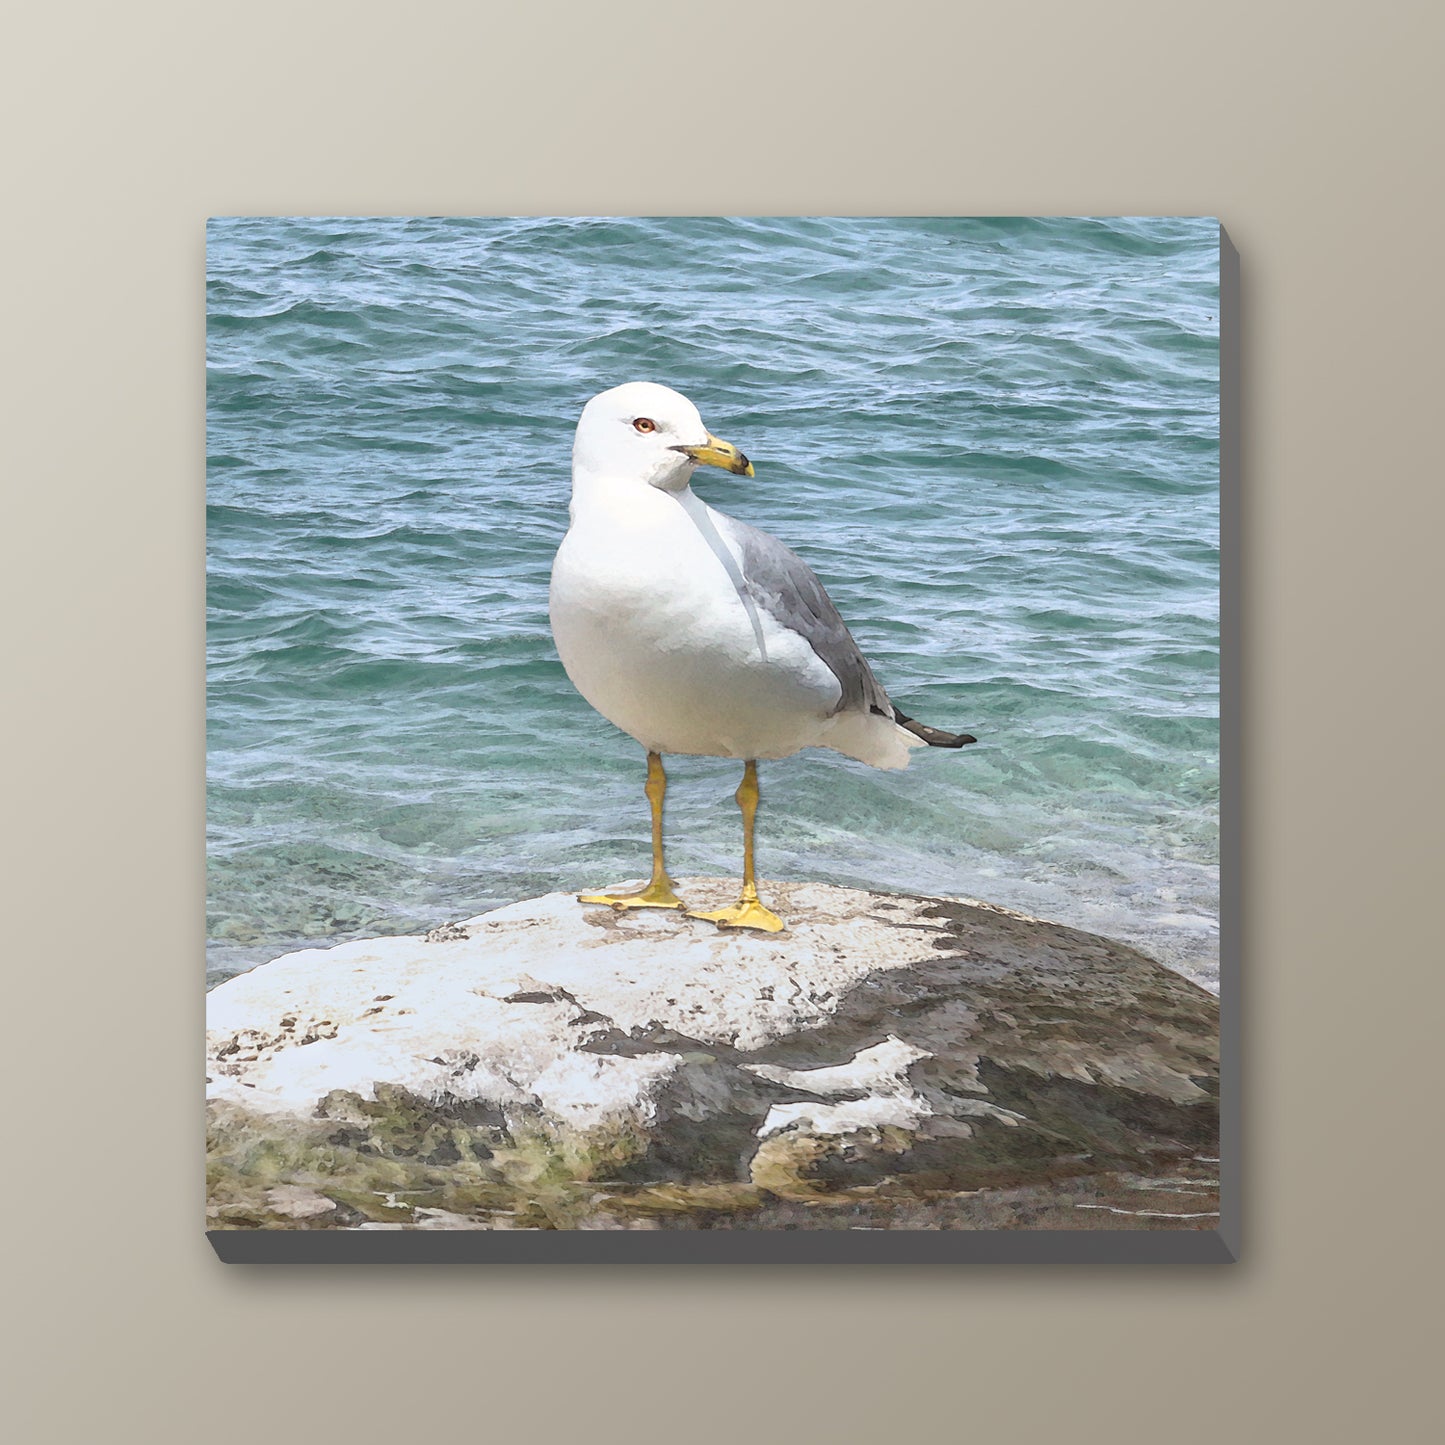 Set of 2 Seagull Wrapped Canvas Prints